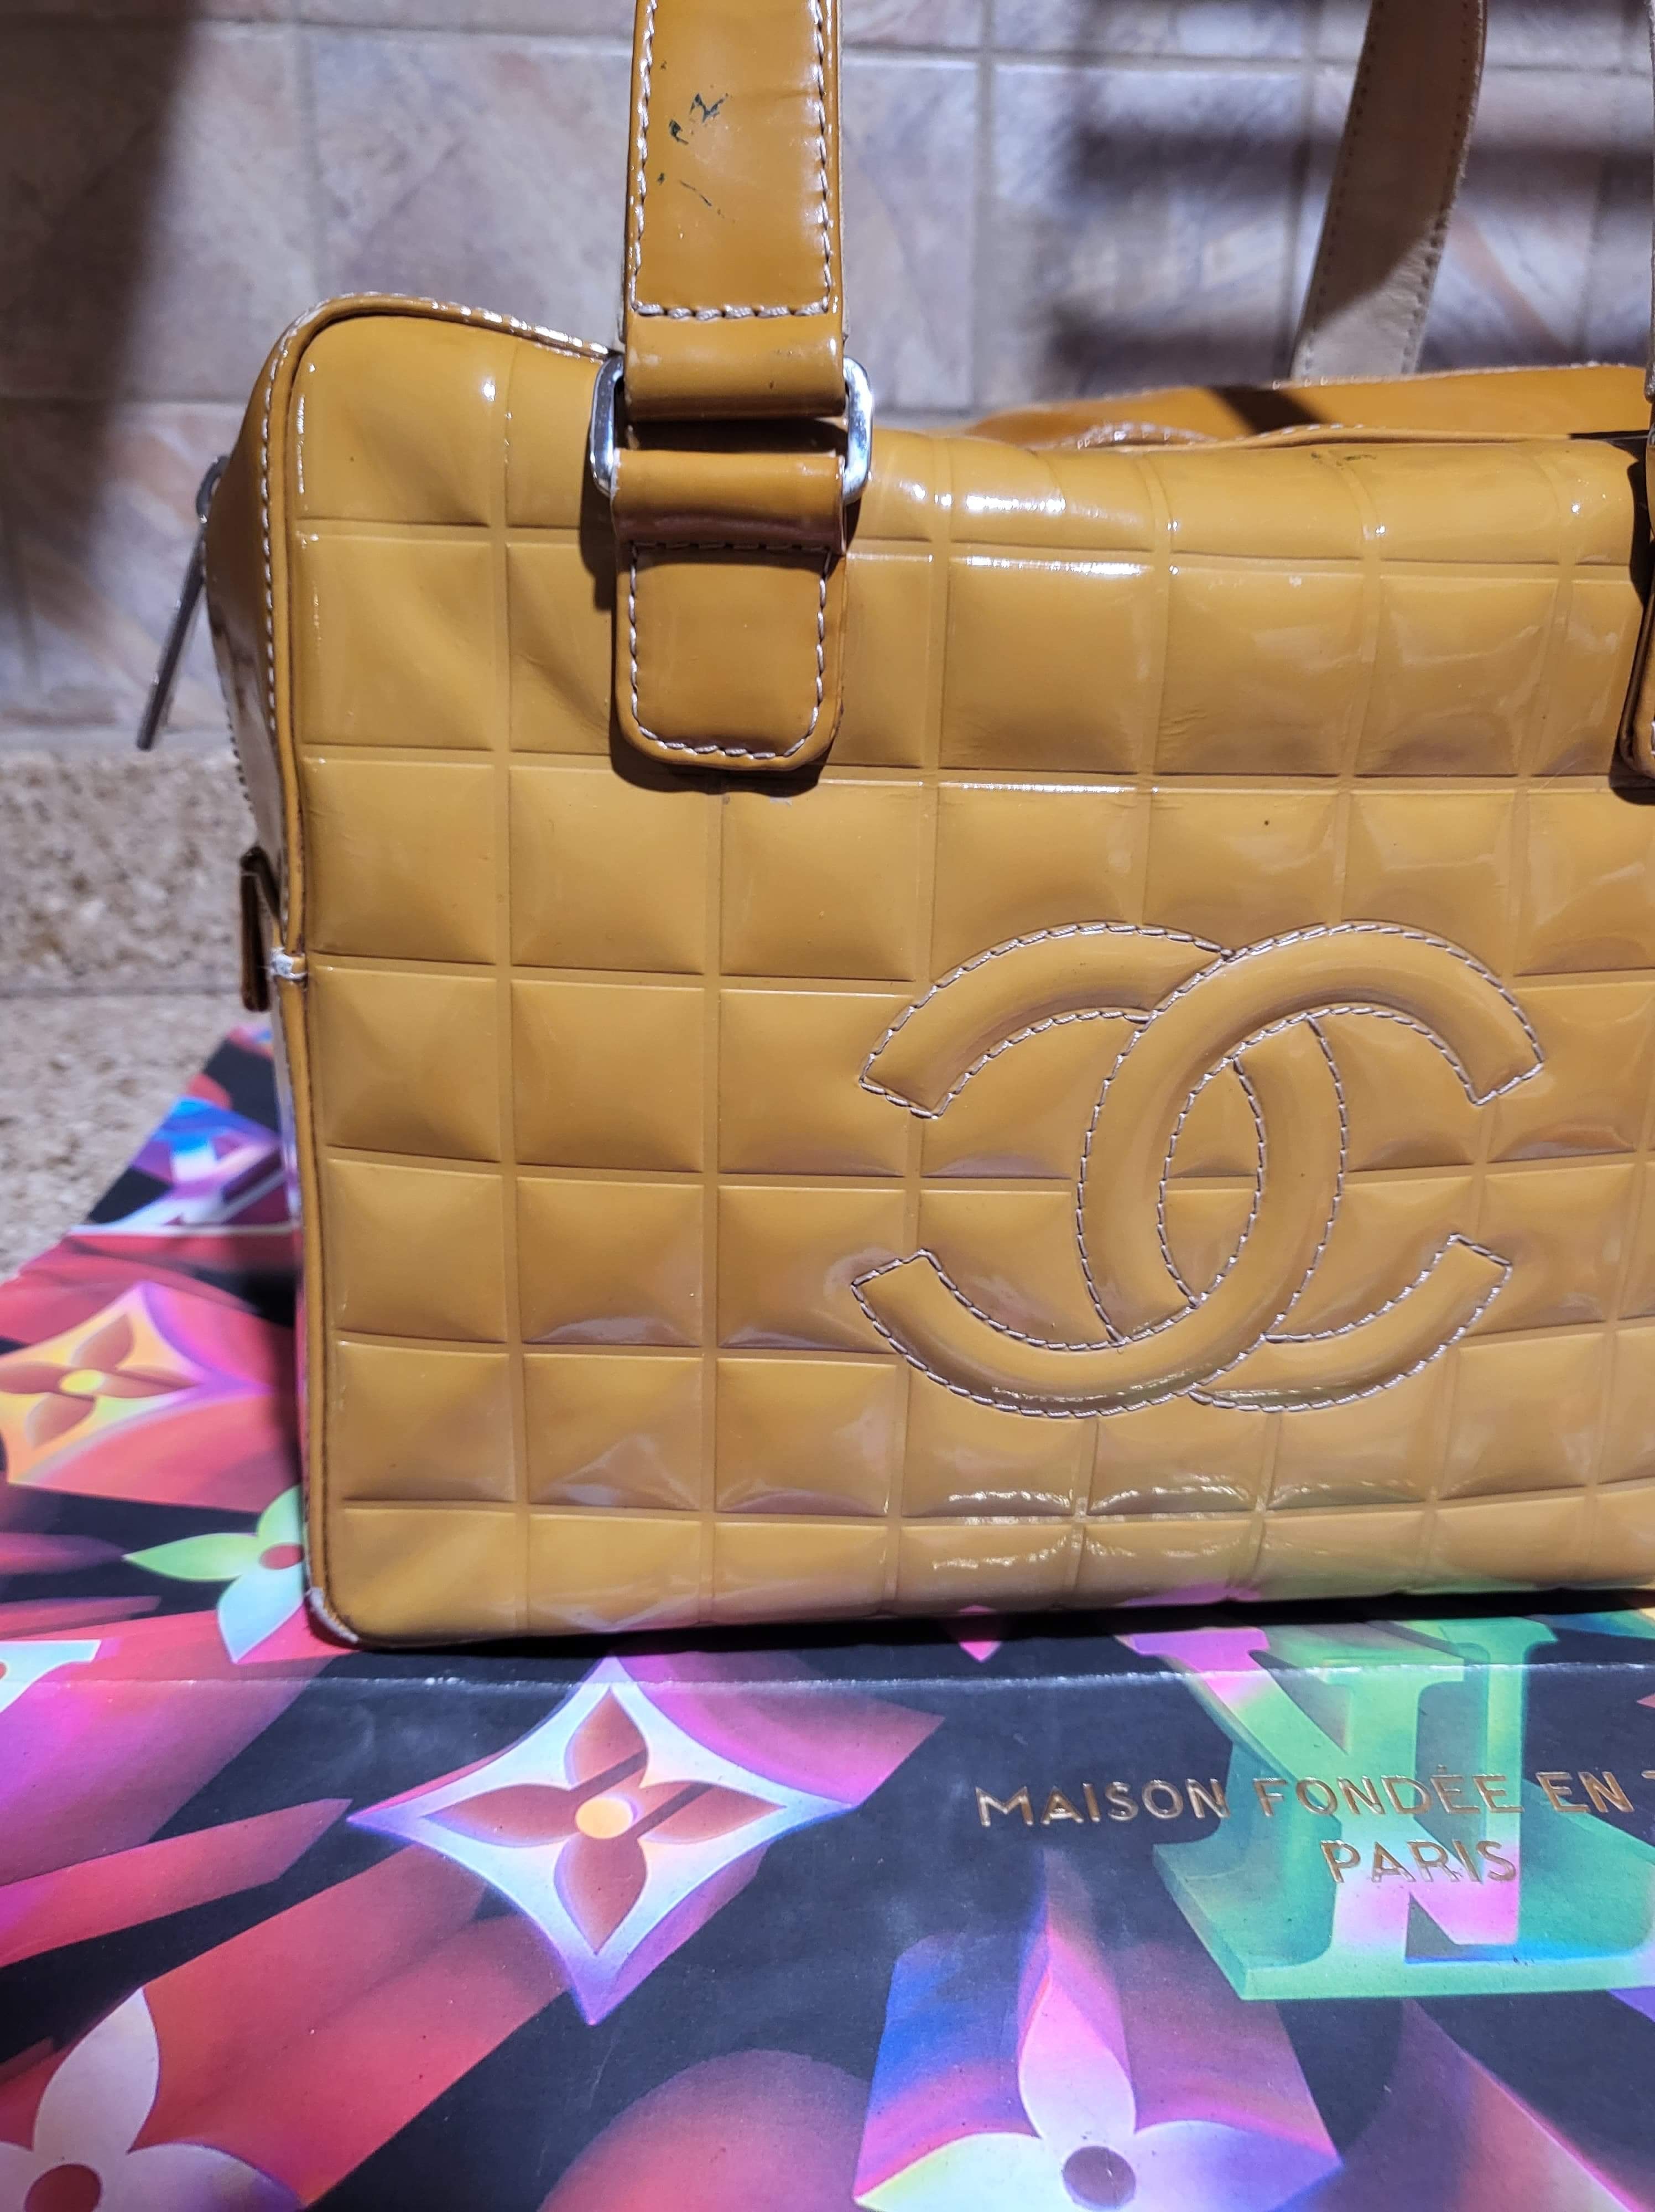 Authentic Chanel Enamel Patient leather handbag – The Neon Gypsy Shopping